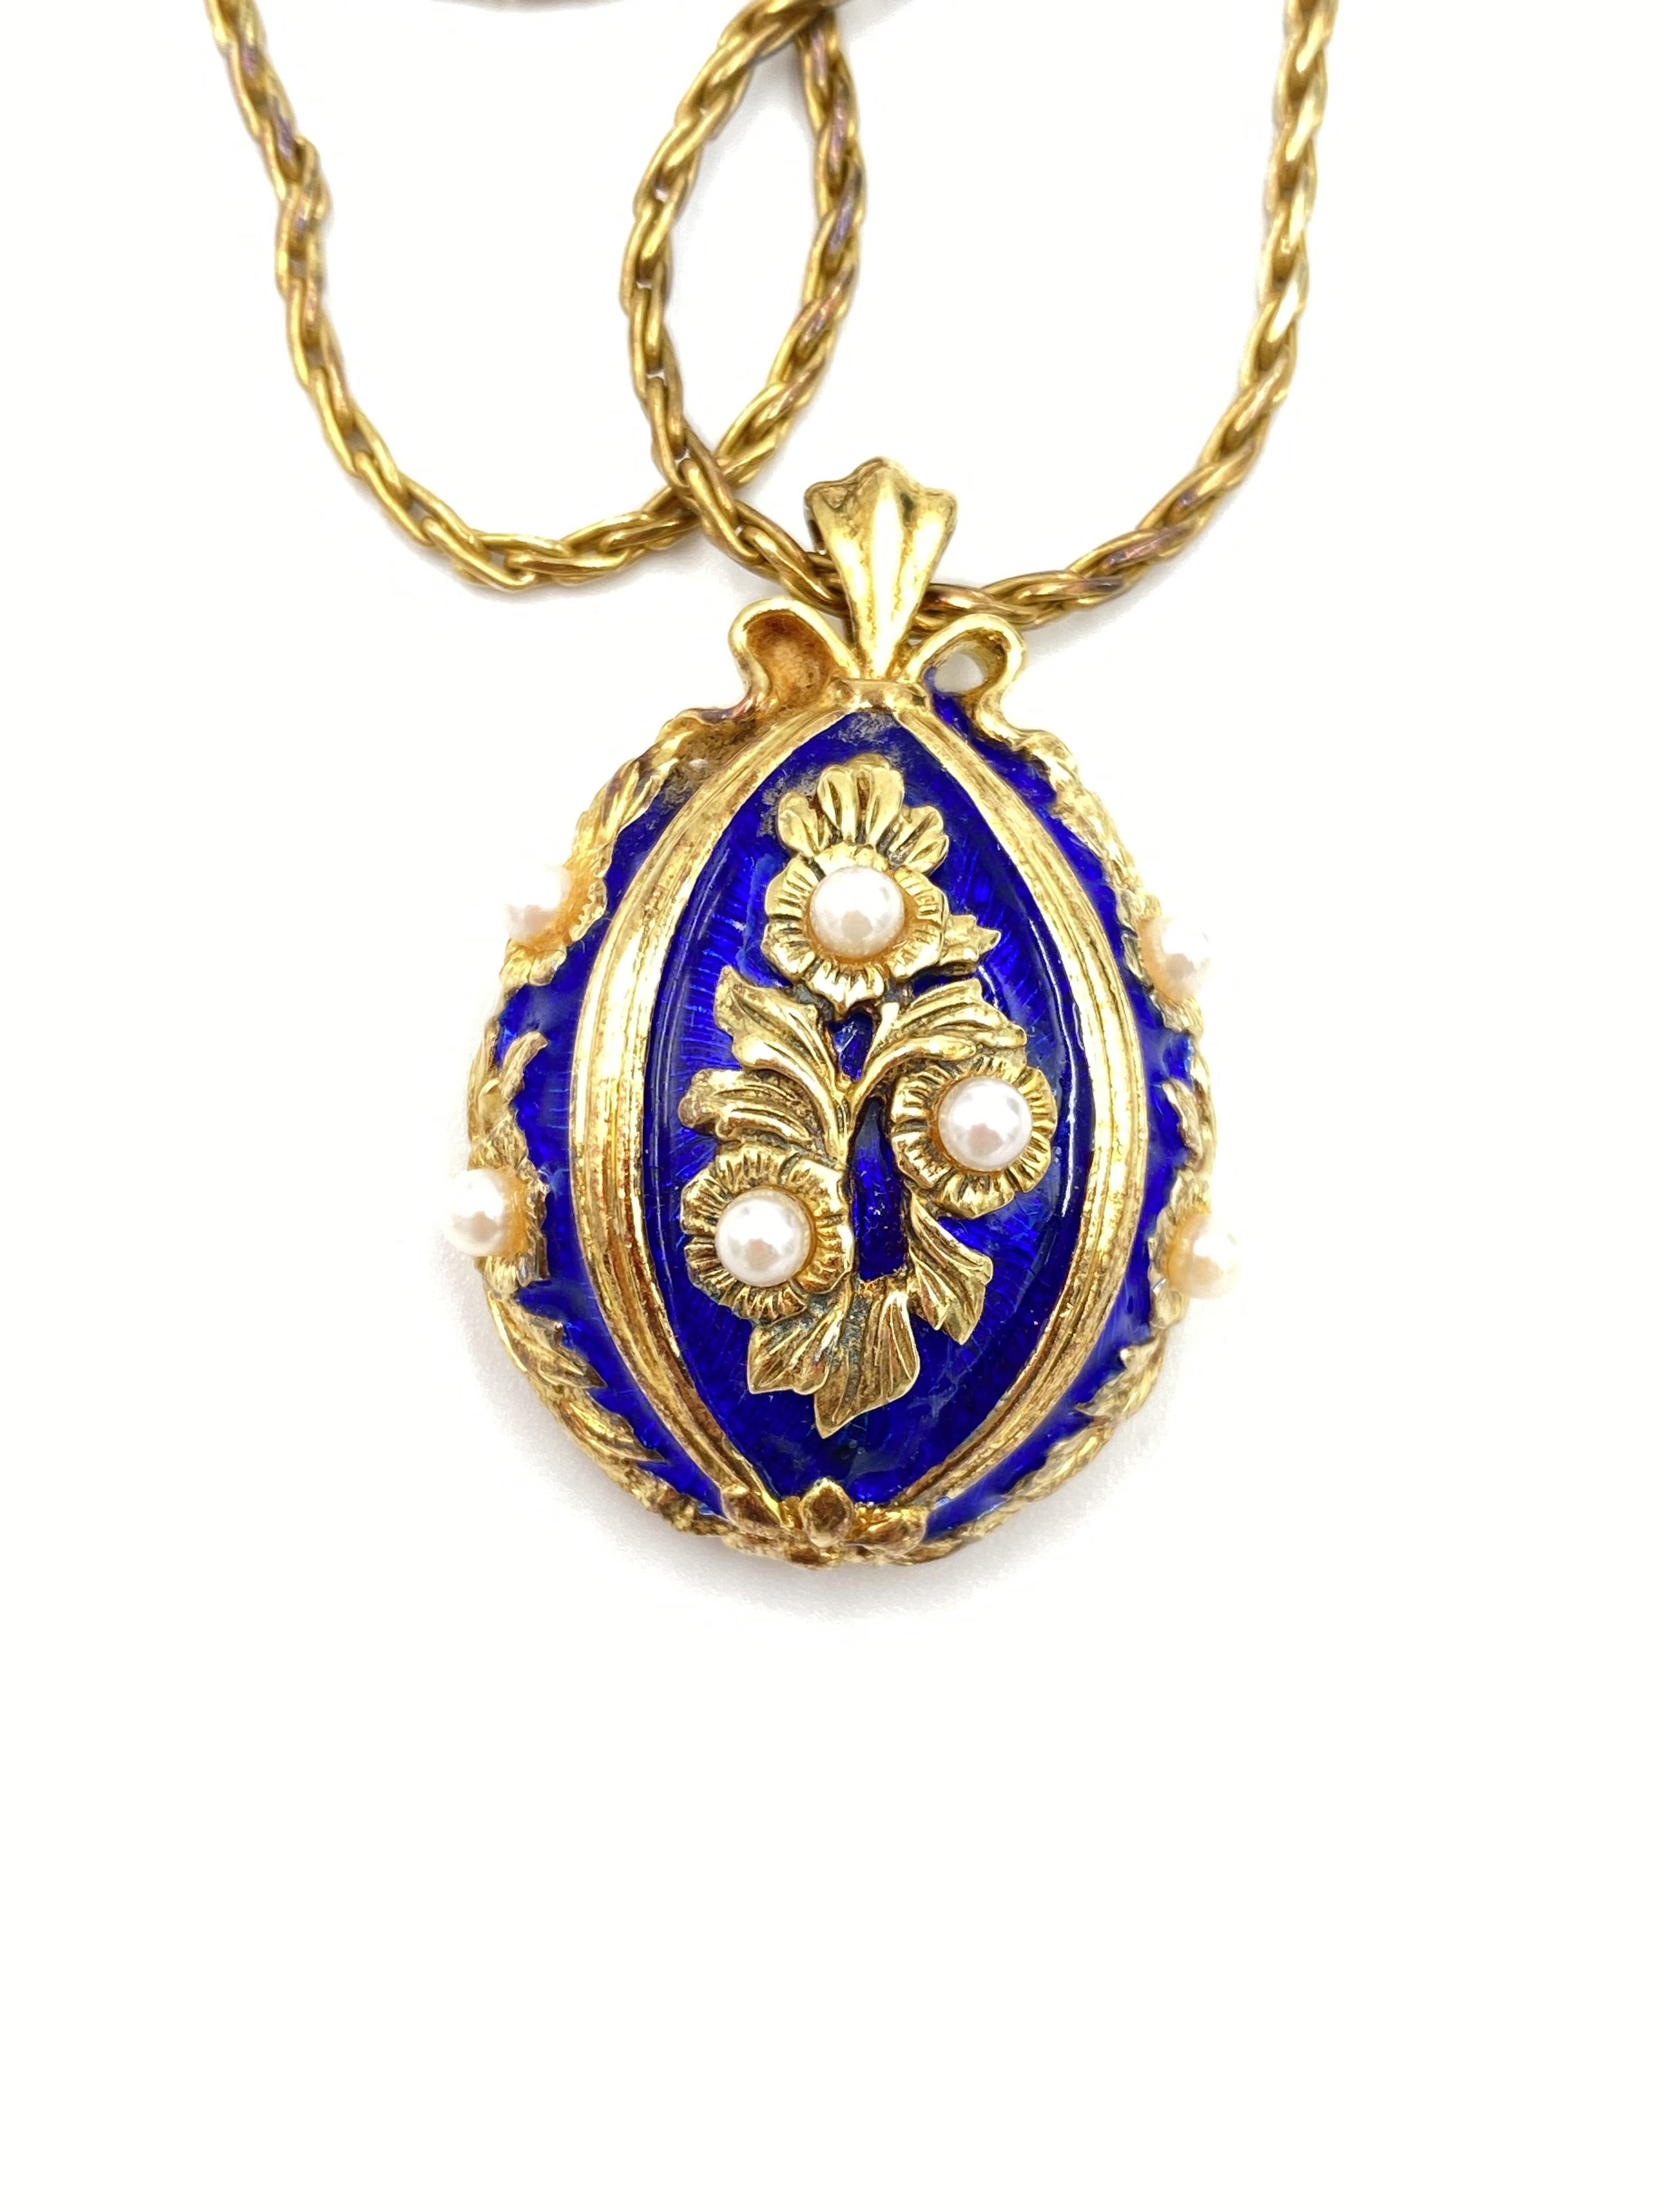 Franklin Mint pendant with watch on chain marked 925.